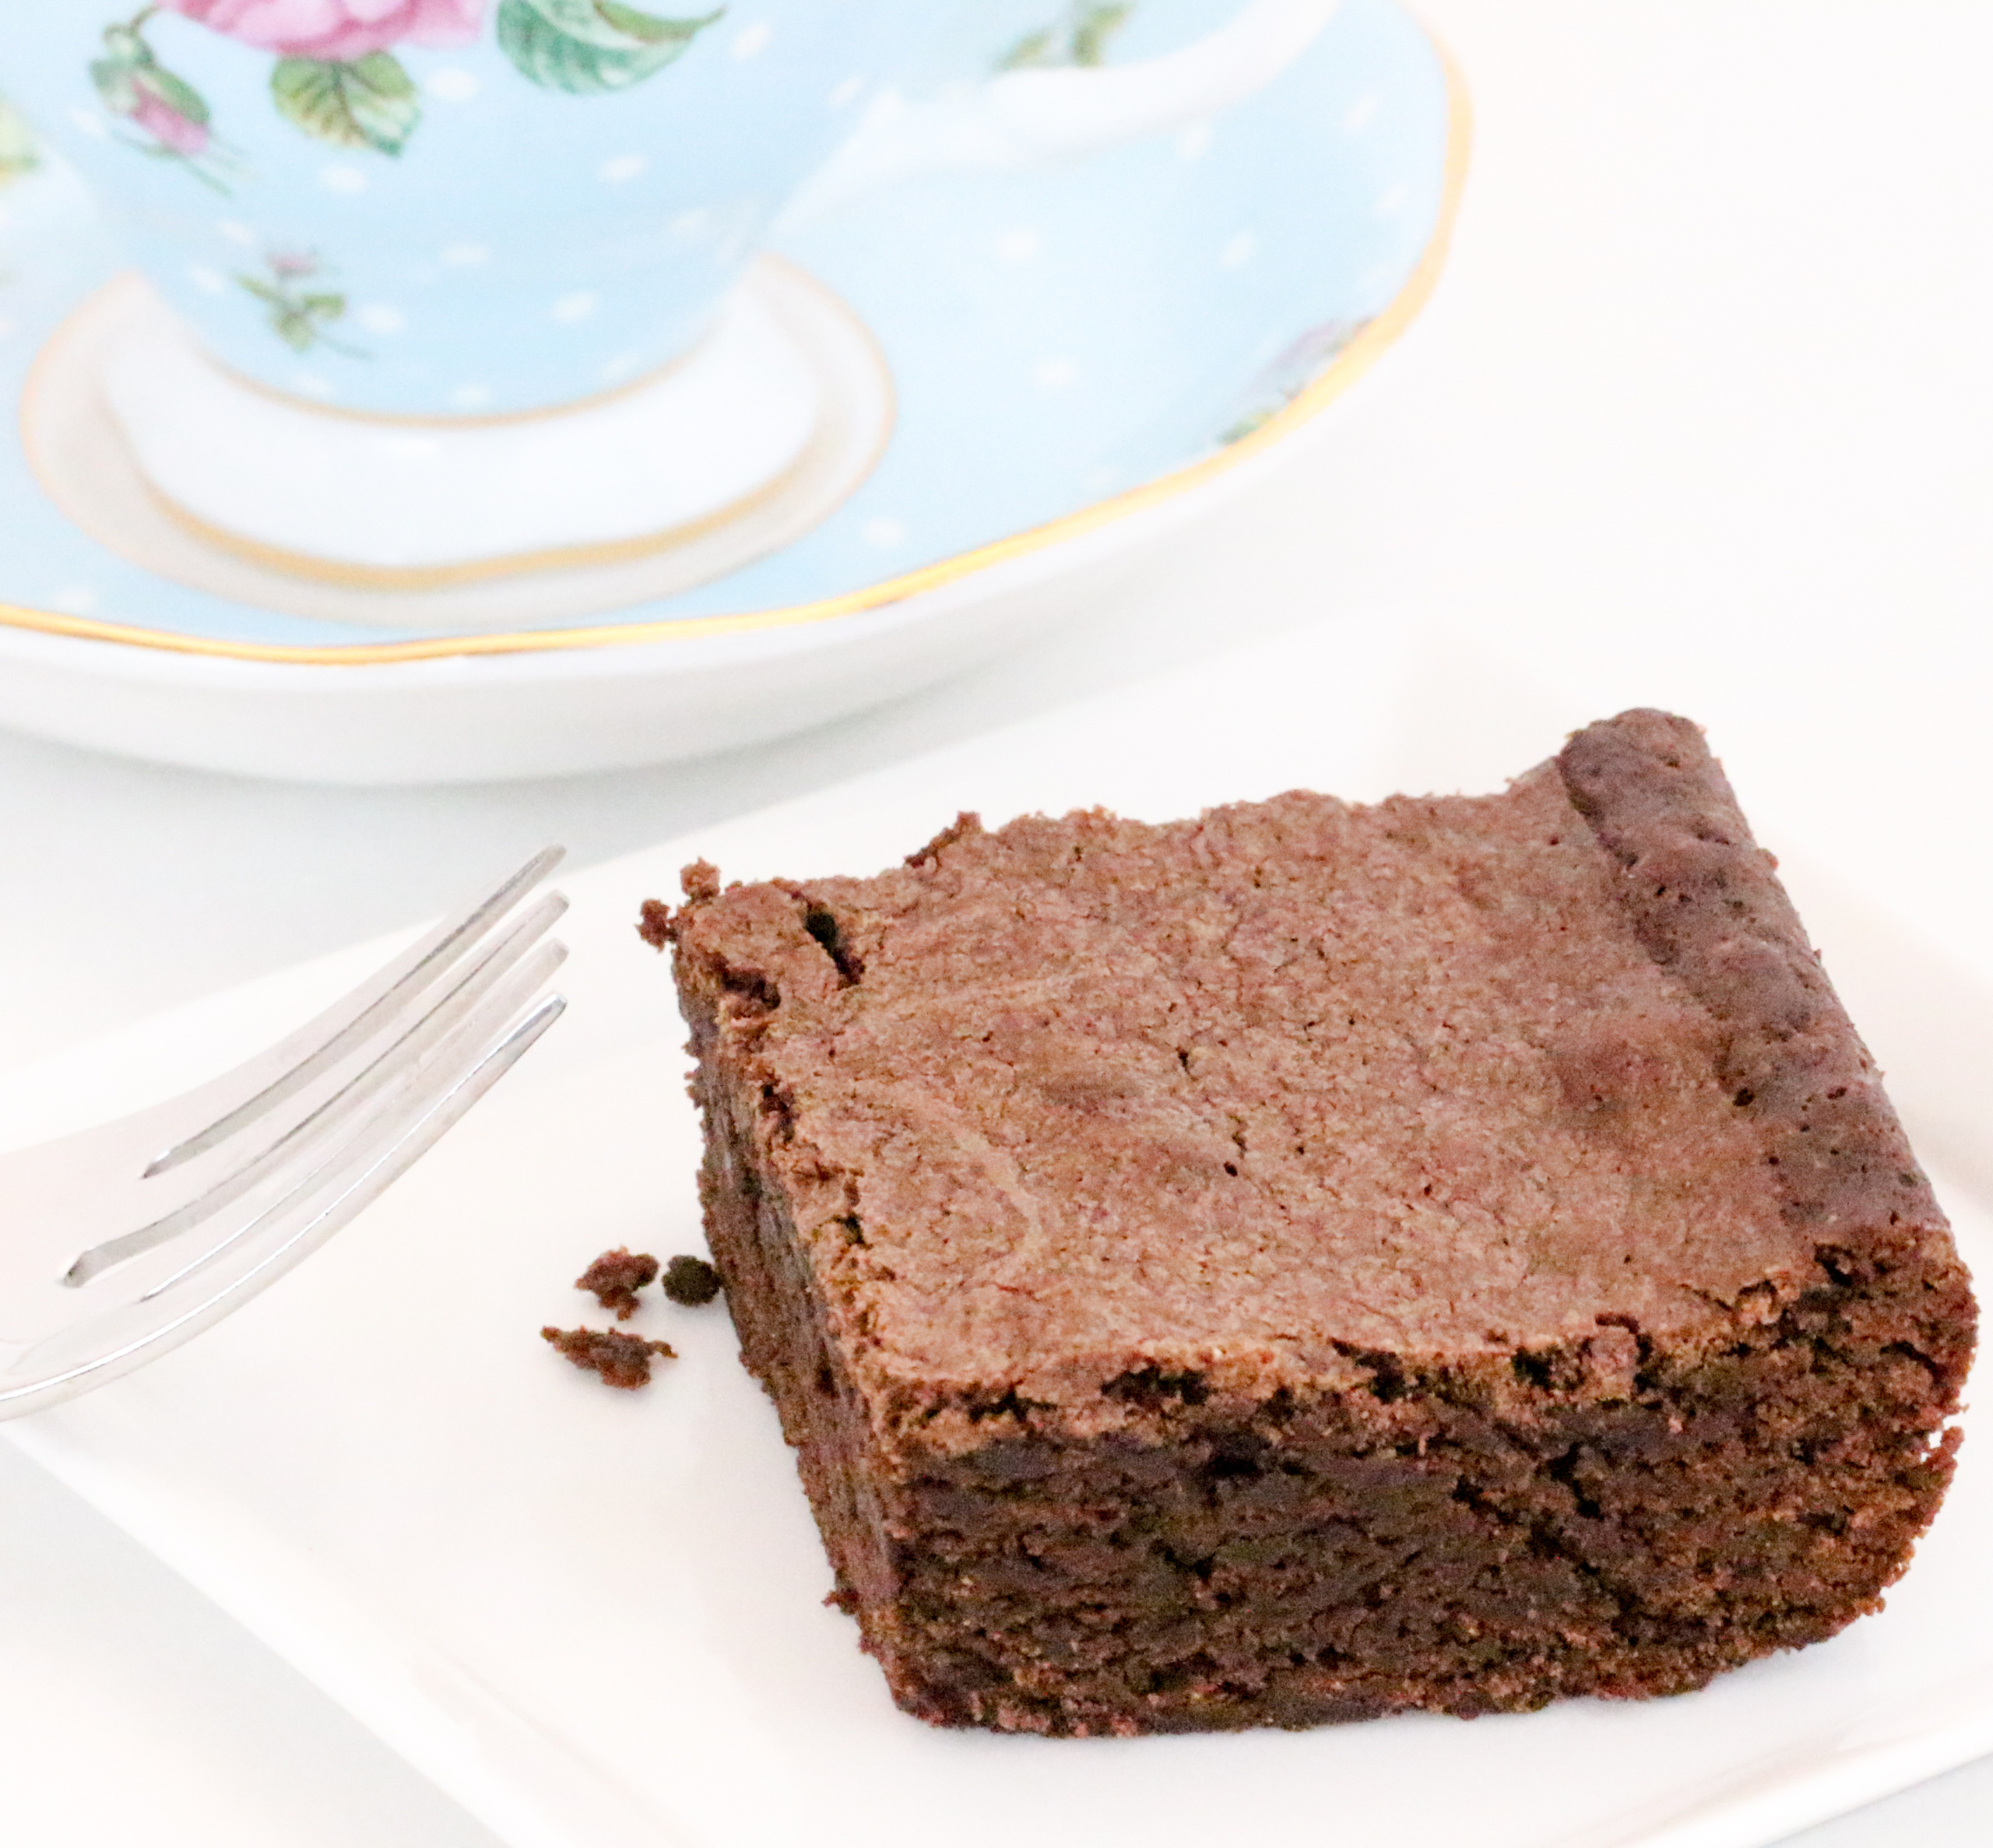 Rich and thick, almost like fudge, Olga's Brownies are scrumptious treats that will satisfy the most avid chocoholic! And cleanup is a breeze since the recipe uses only 1 saucepan to whisk the ingredients together. Recipe shared with permission granted by Barbara Ross, author of SEALED OFF. 